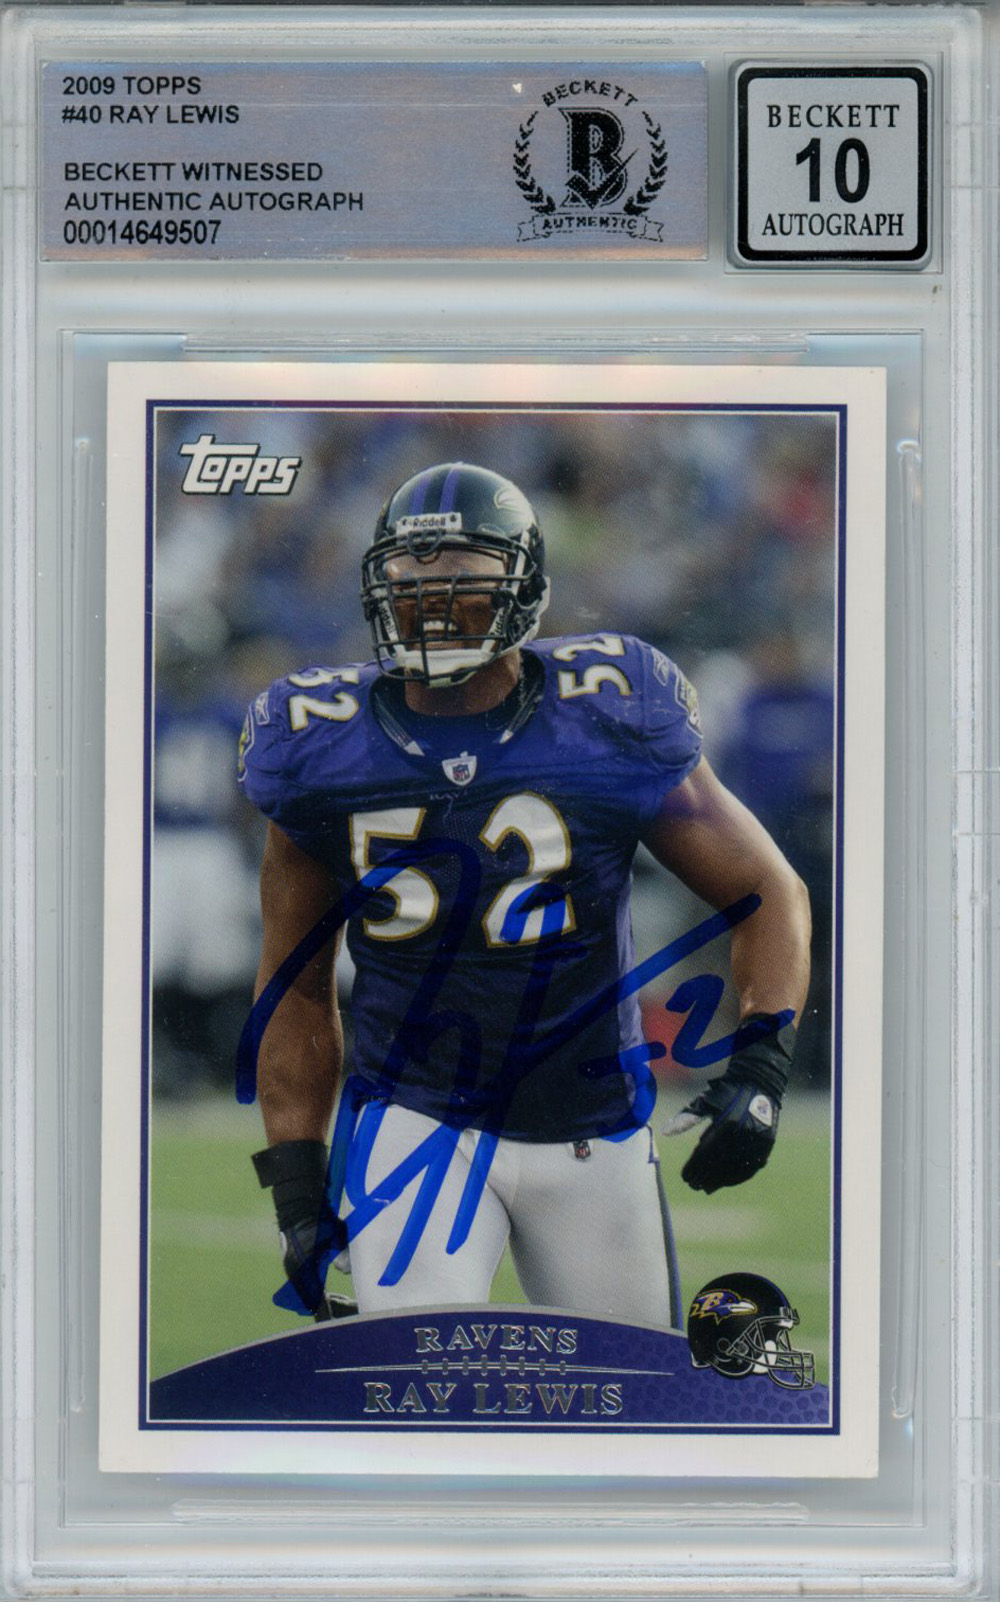 Ray Lewis Autographed/Signed 2009 Topps #40 Trading Card Beckett 10 Slab